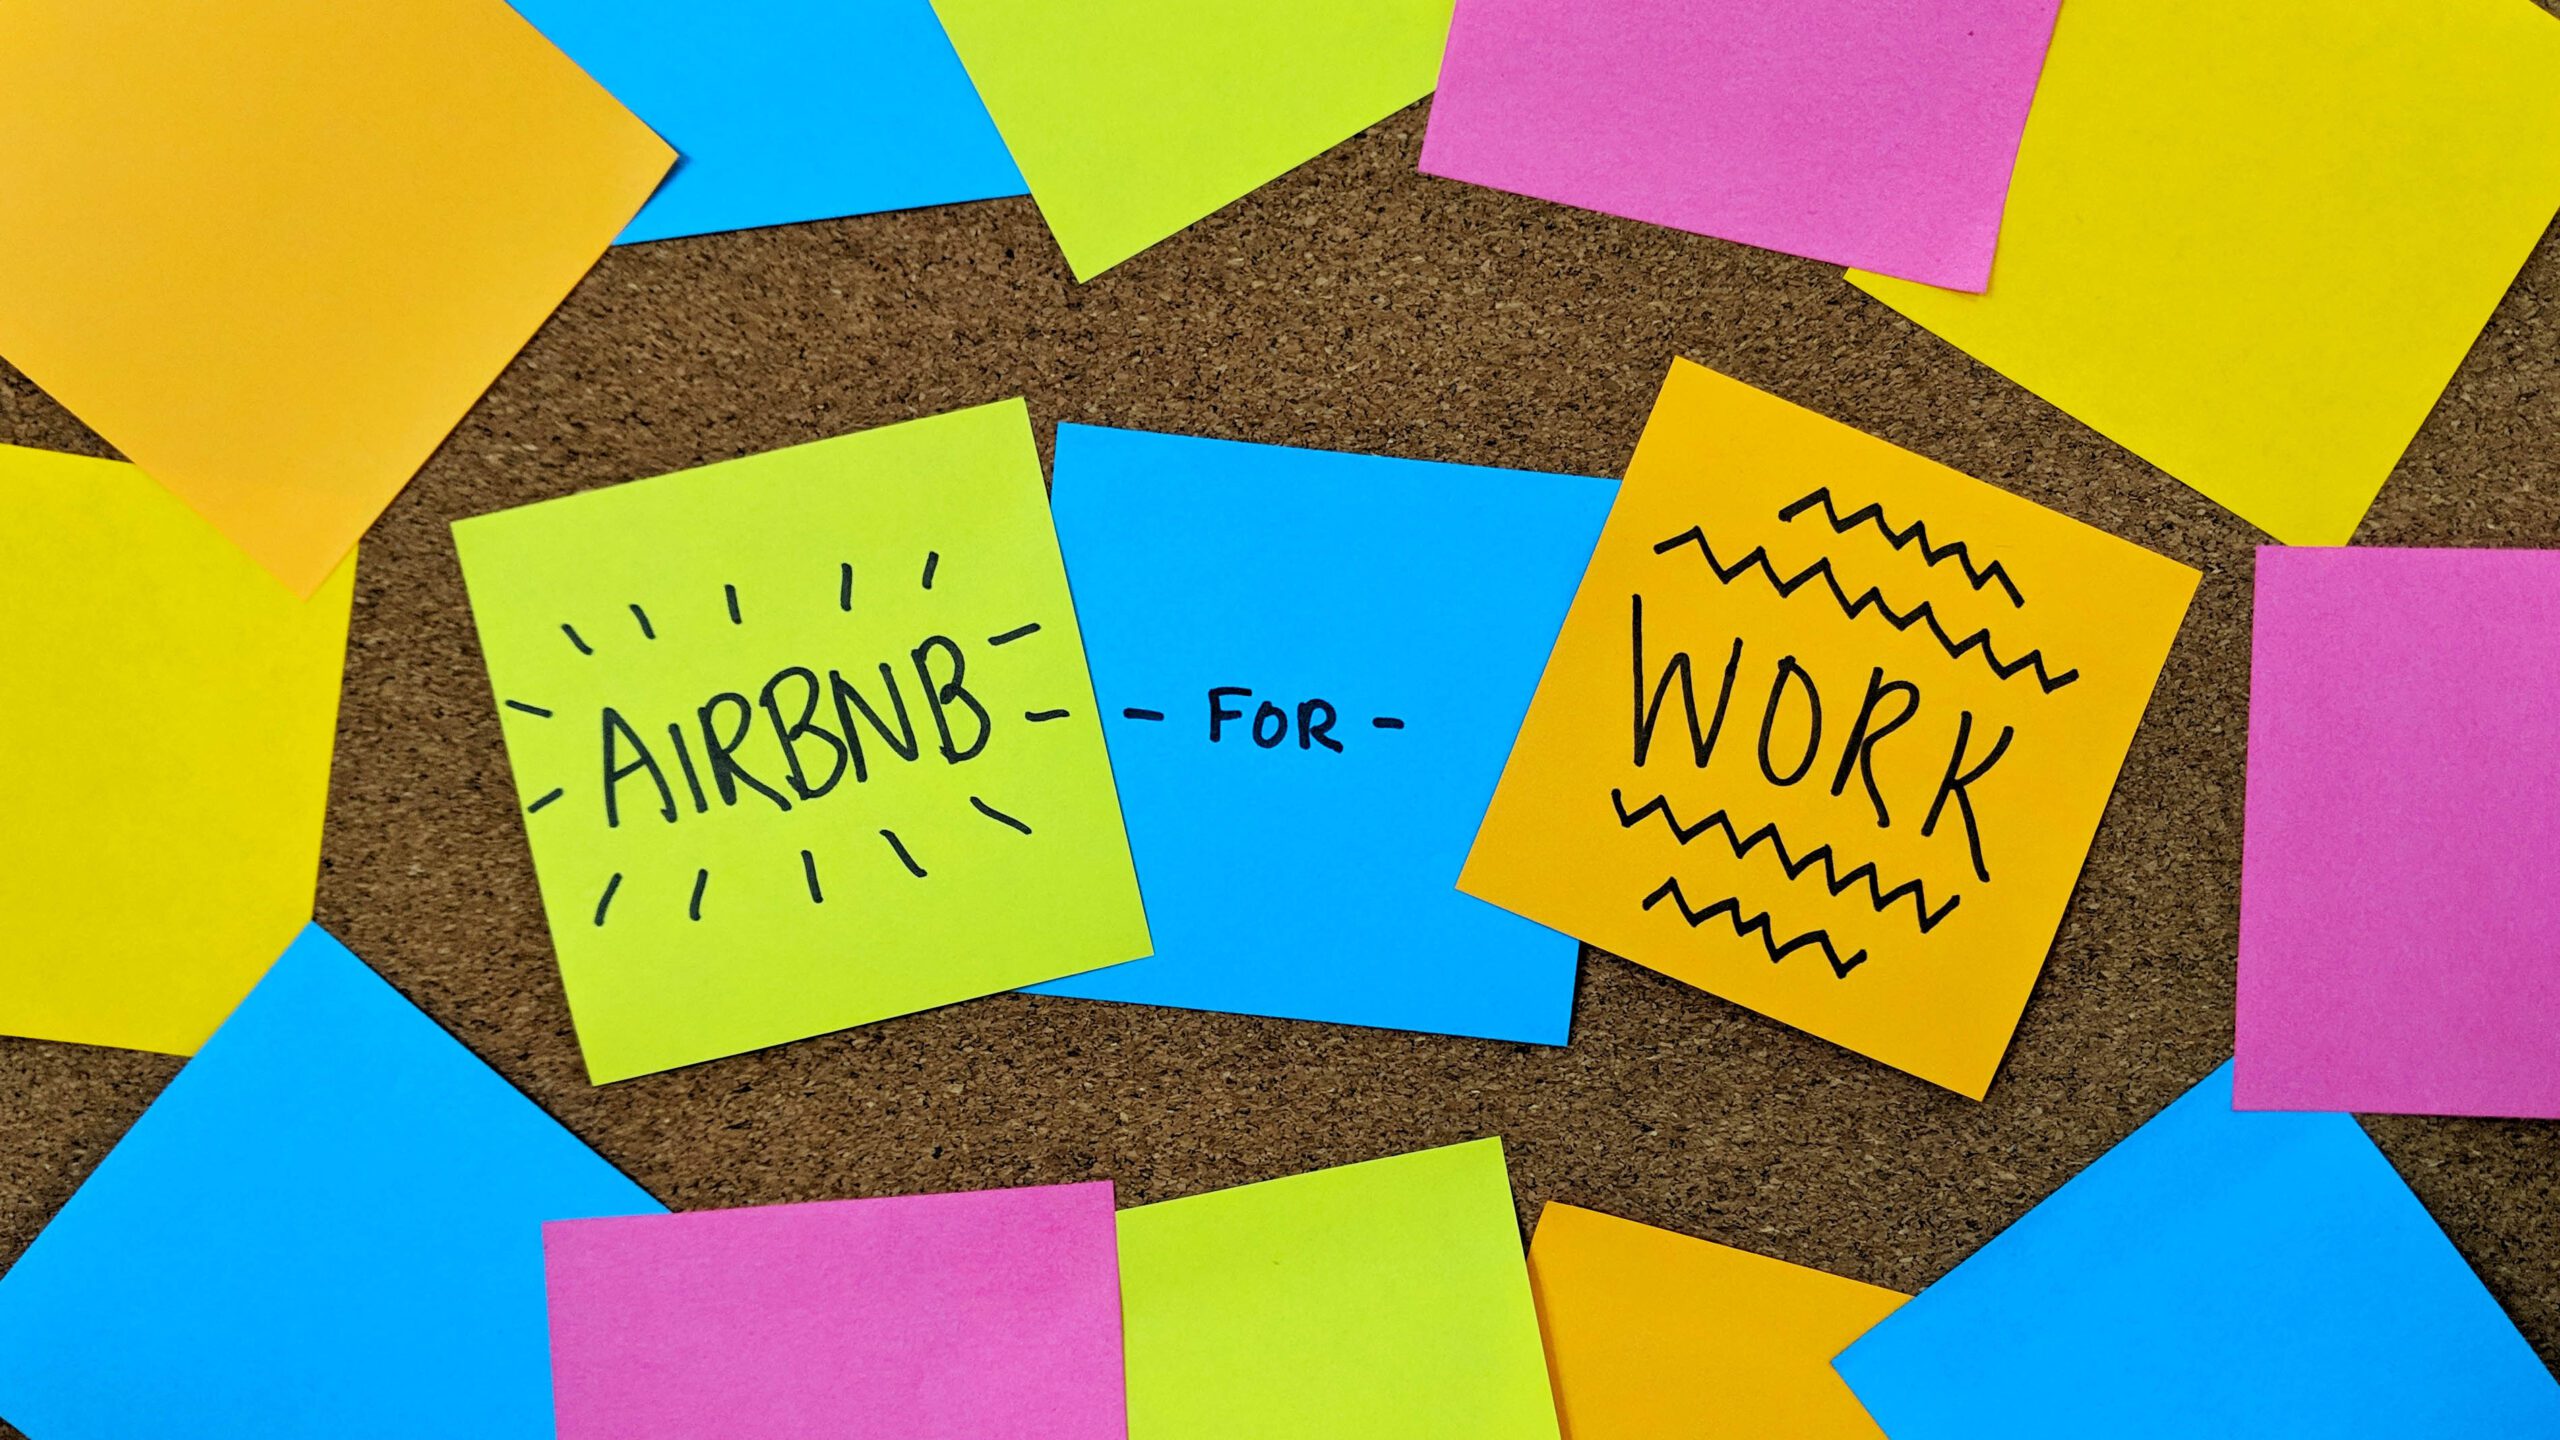 Airbnb-for-Work-_-Sticky-Notes-with-Writing